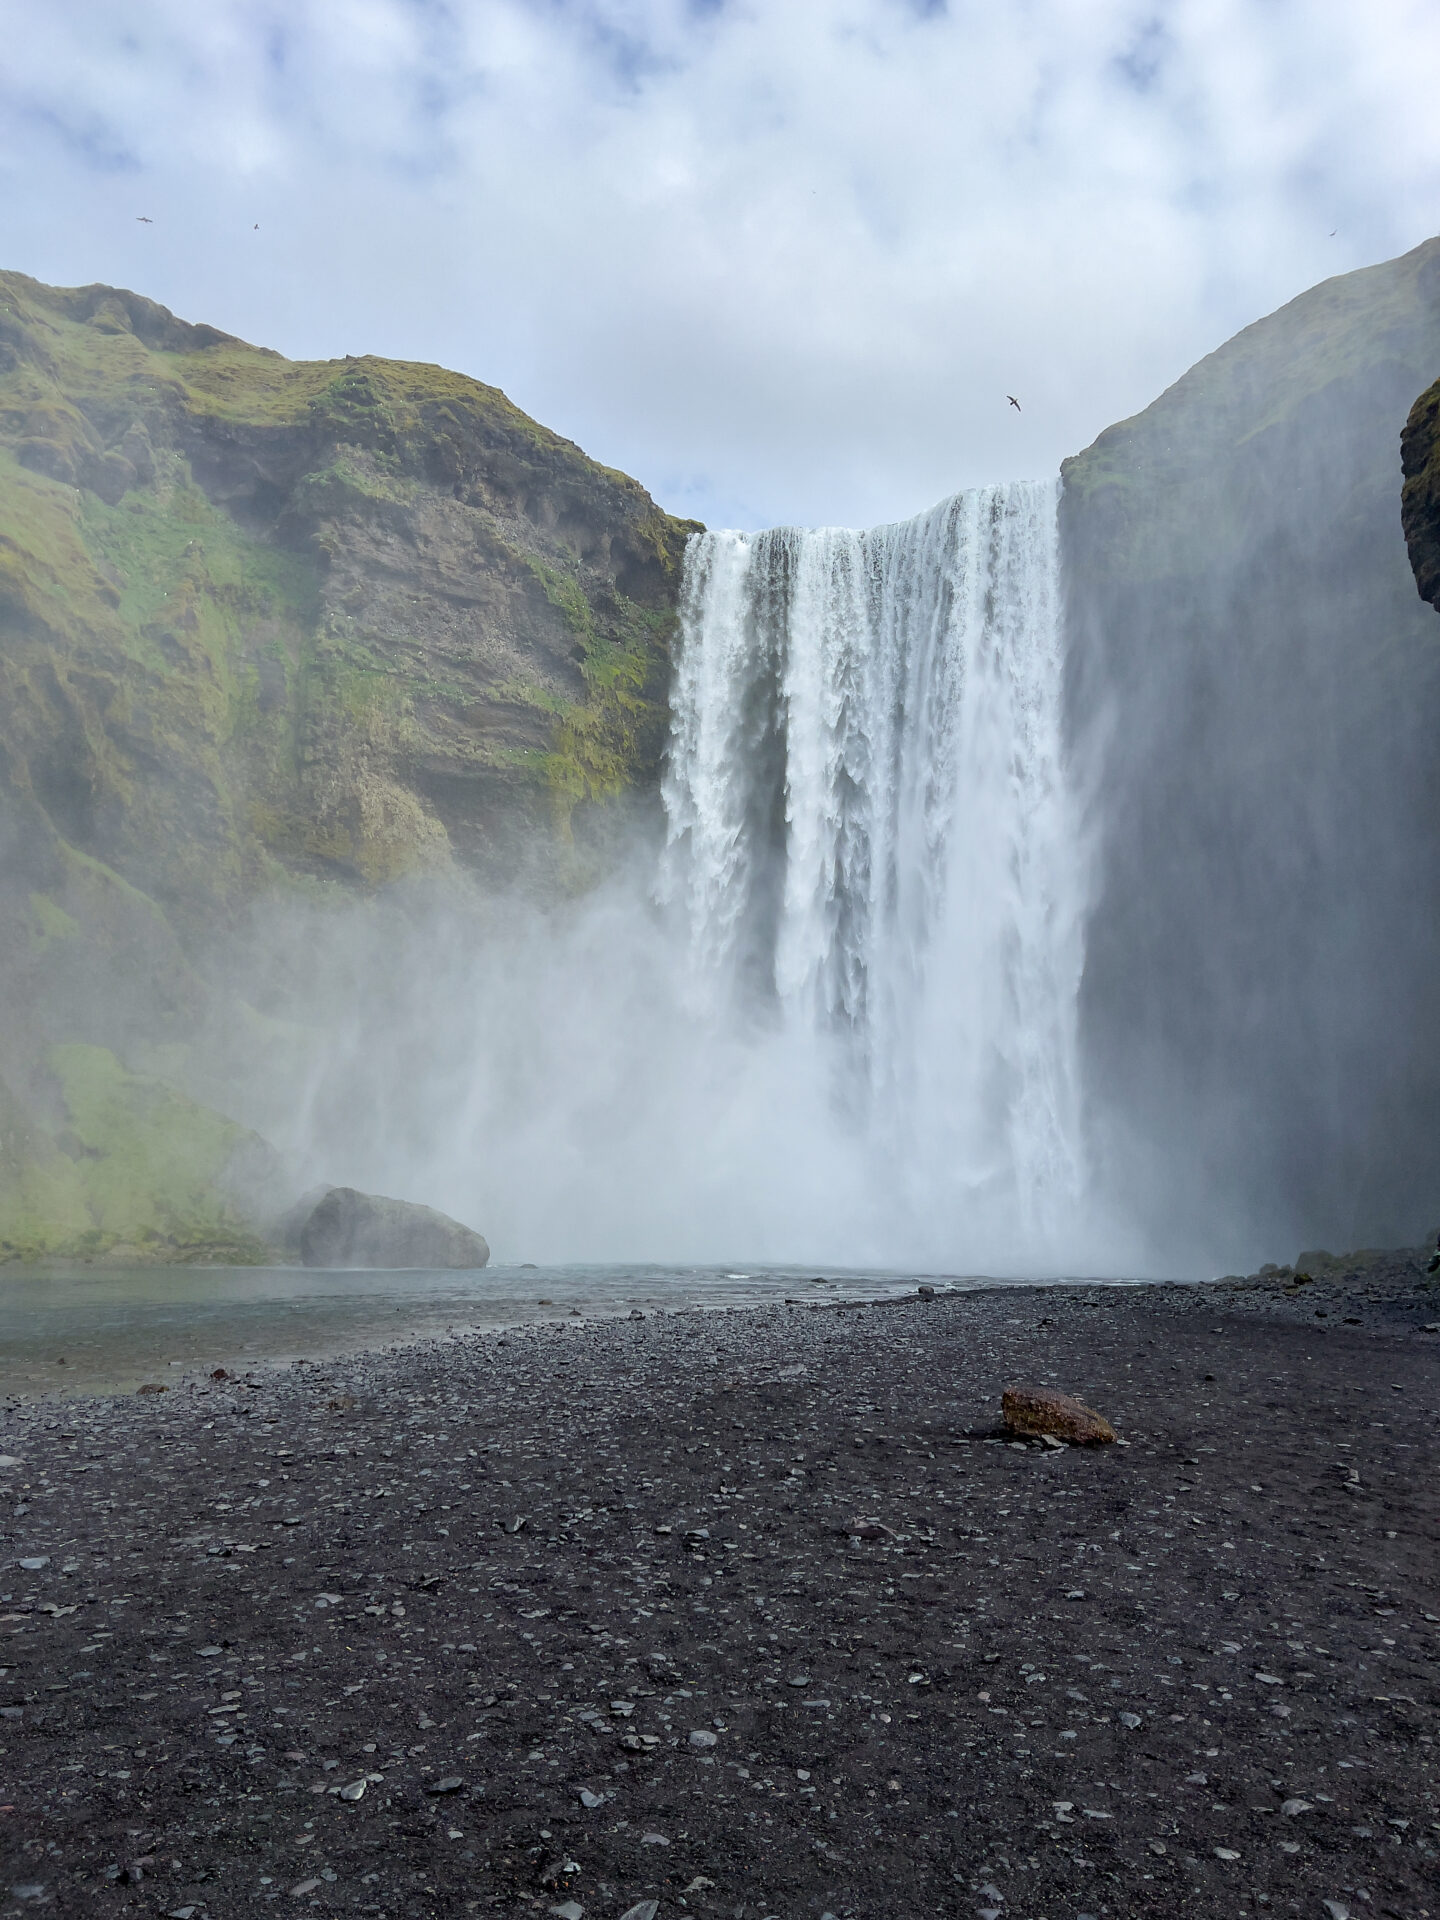 Skogafoss is a must on any Iceland itinerary